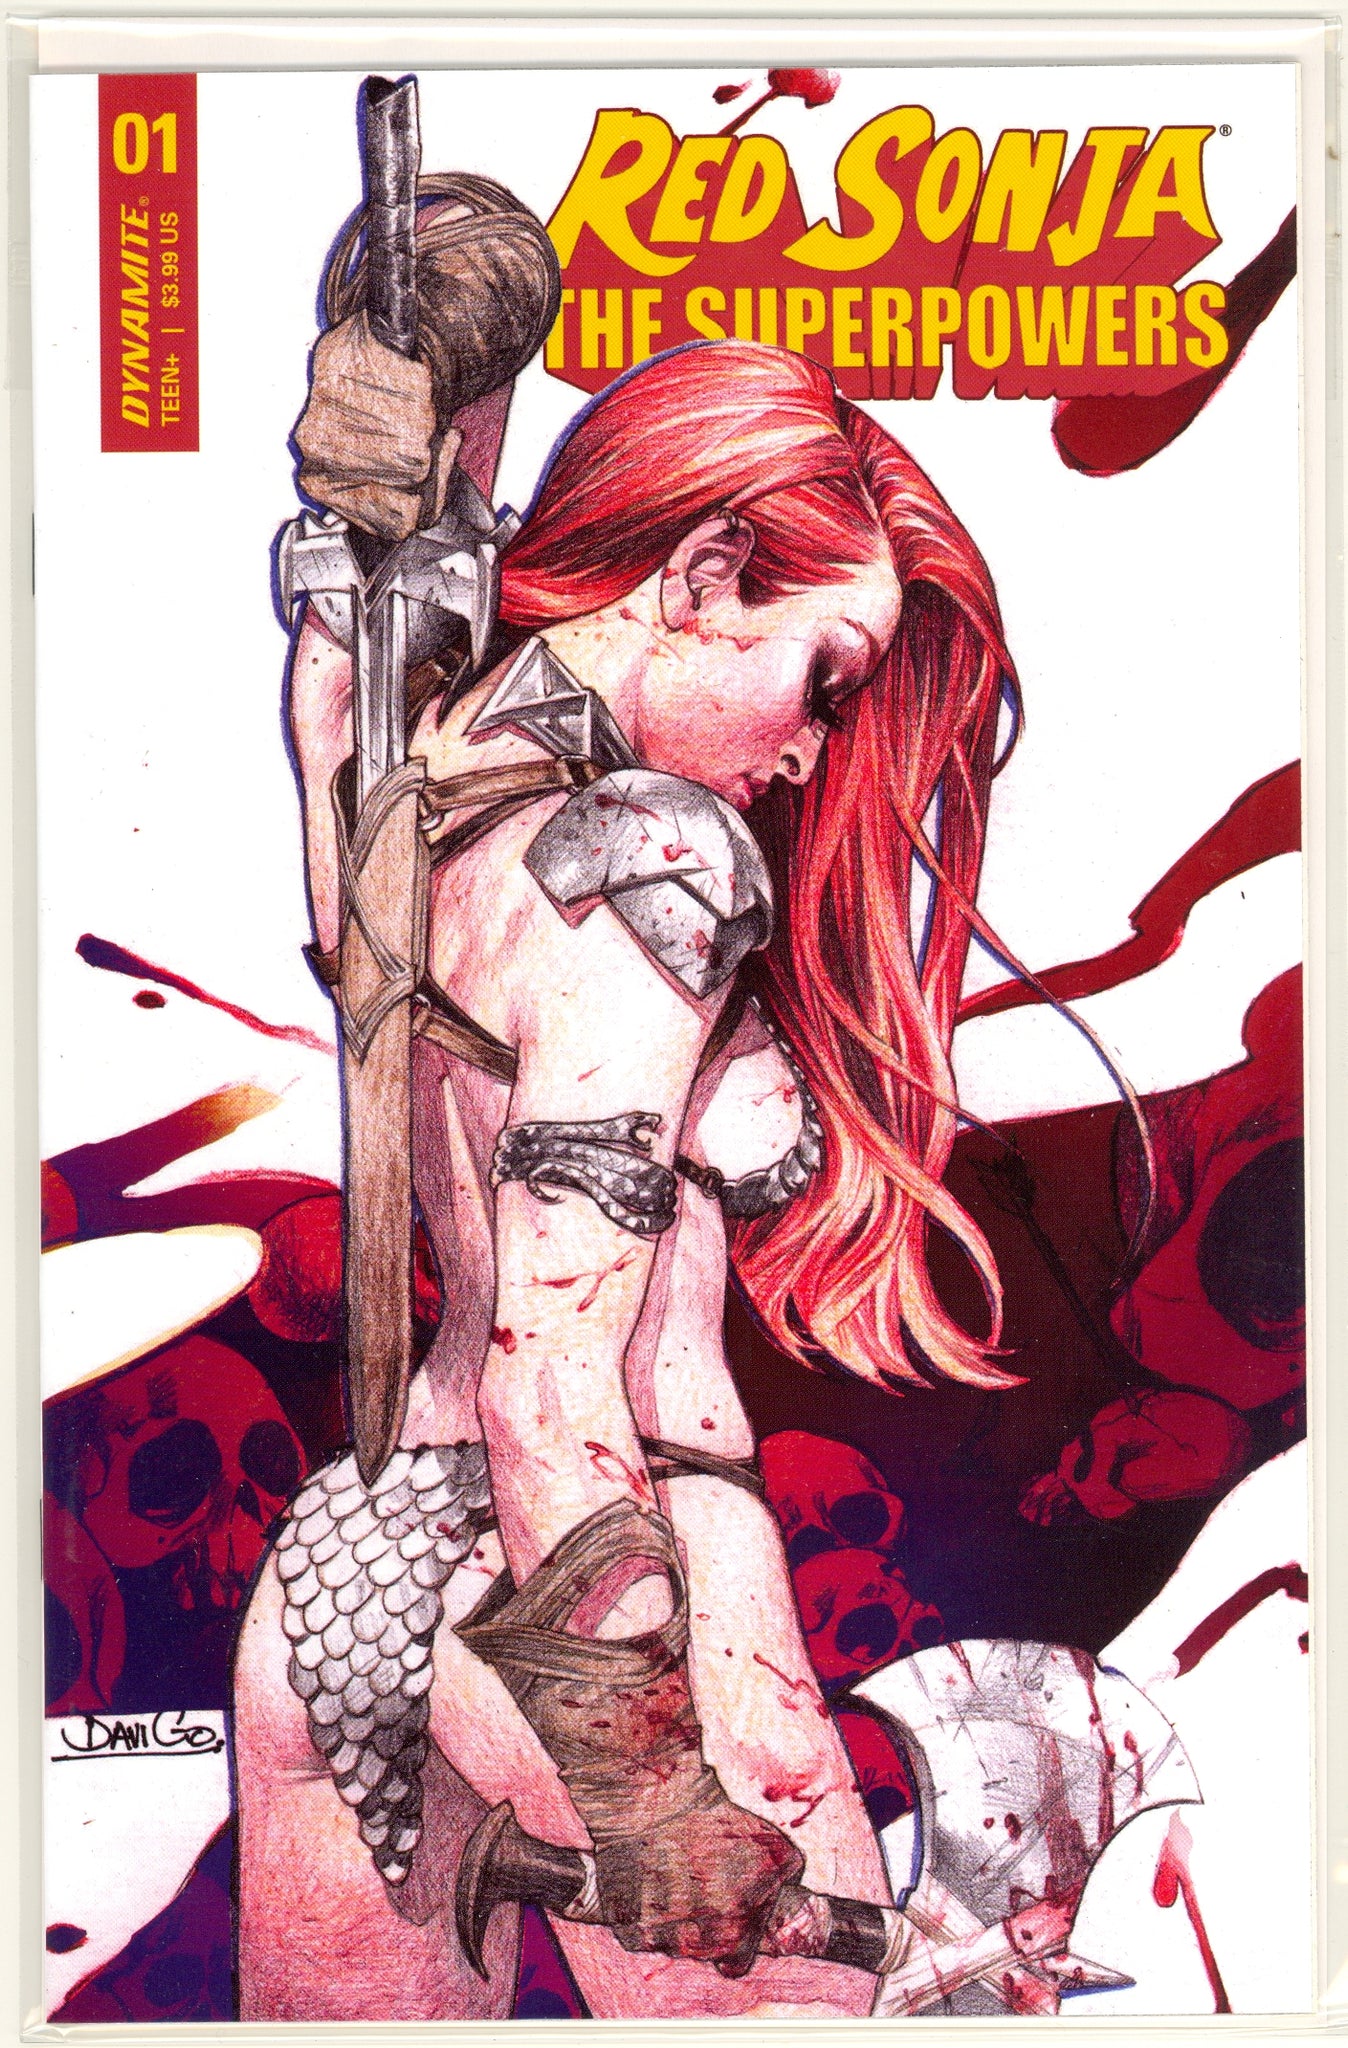 Red Sonja:  The Superpowers #1 (2021)